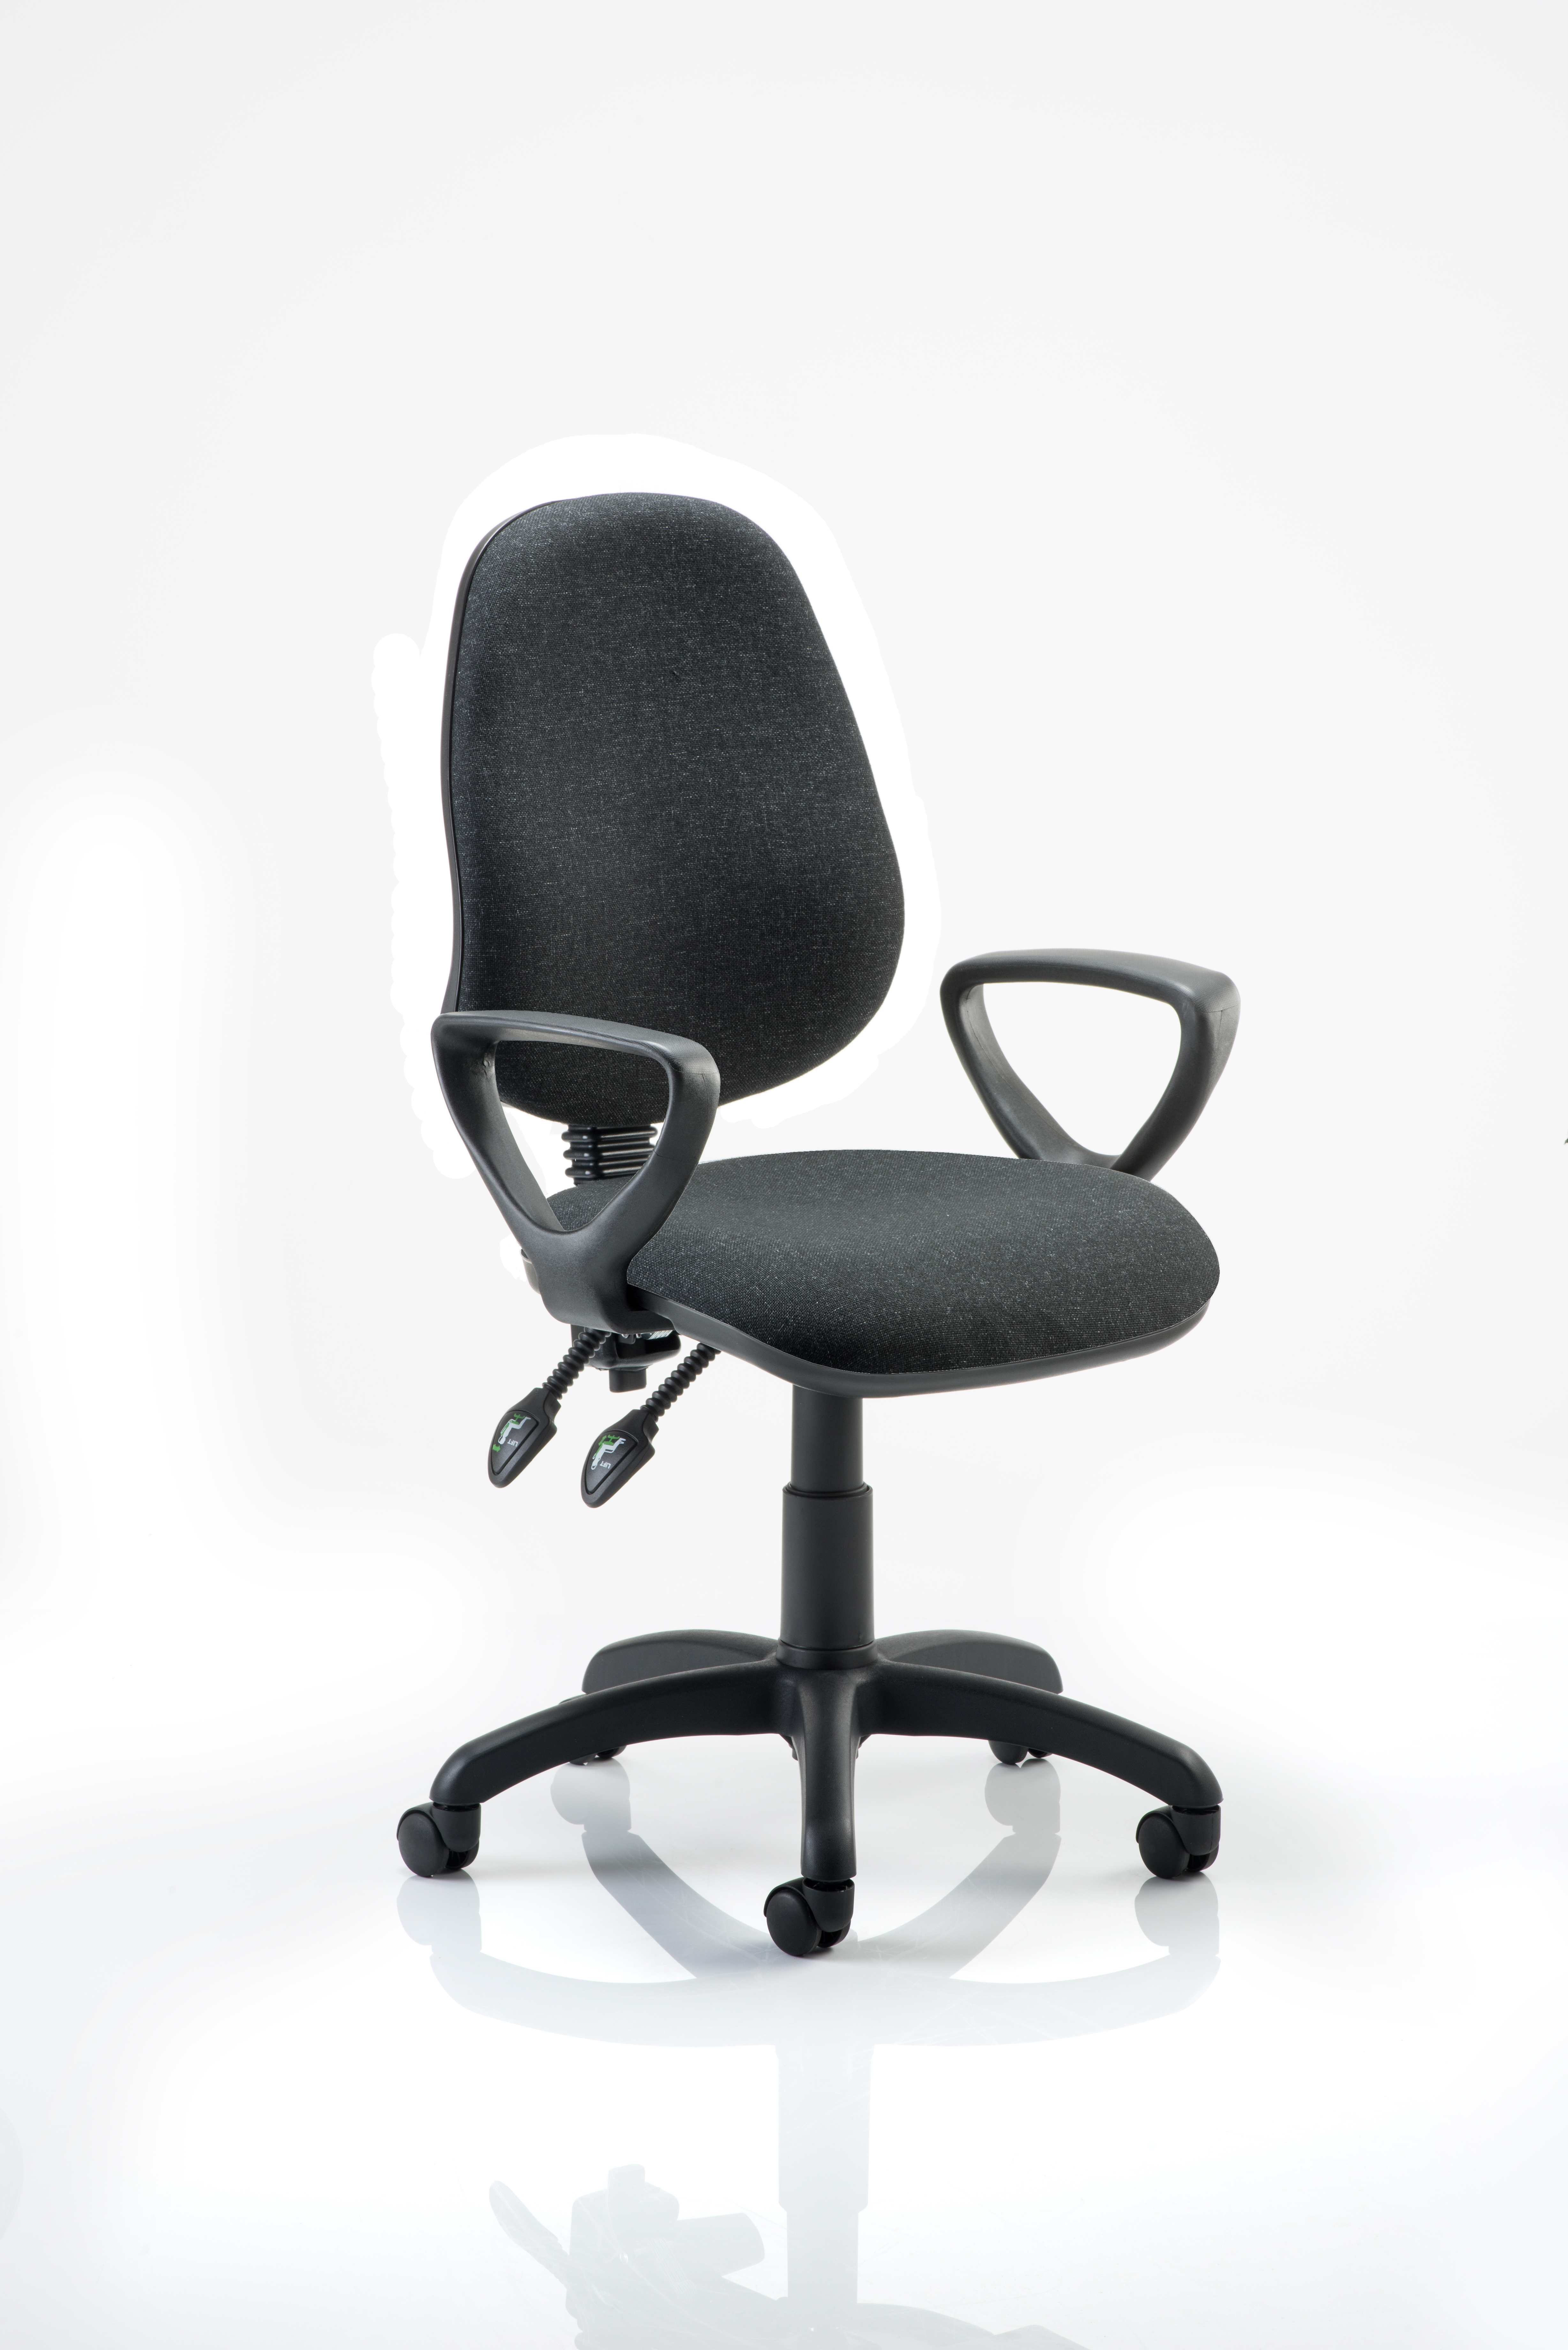 Eclipse Plus II Chair Charcoal Loop Arms KC0024